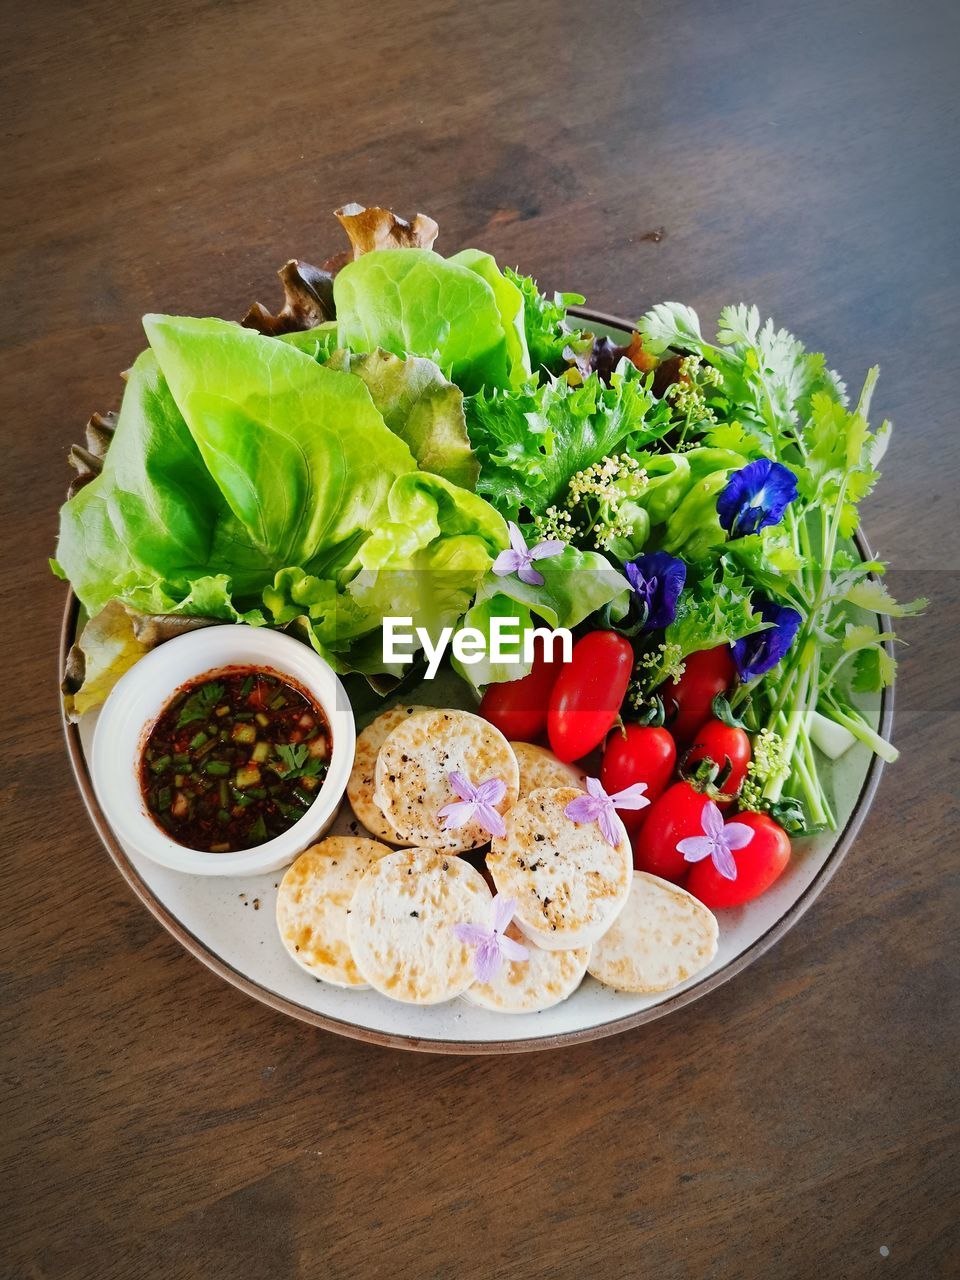 food, food and drink, healthy eating, vegetable, wellbeing, freshness, salad, dish, lettuce, bowl, table, no people, fruit, indoors, tomato, high angle view, variation, meal, plate, still life, studio shot, cuisine, lunch, fast food, produce, salad bowl, wood, directly above